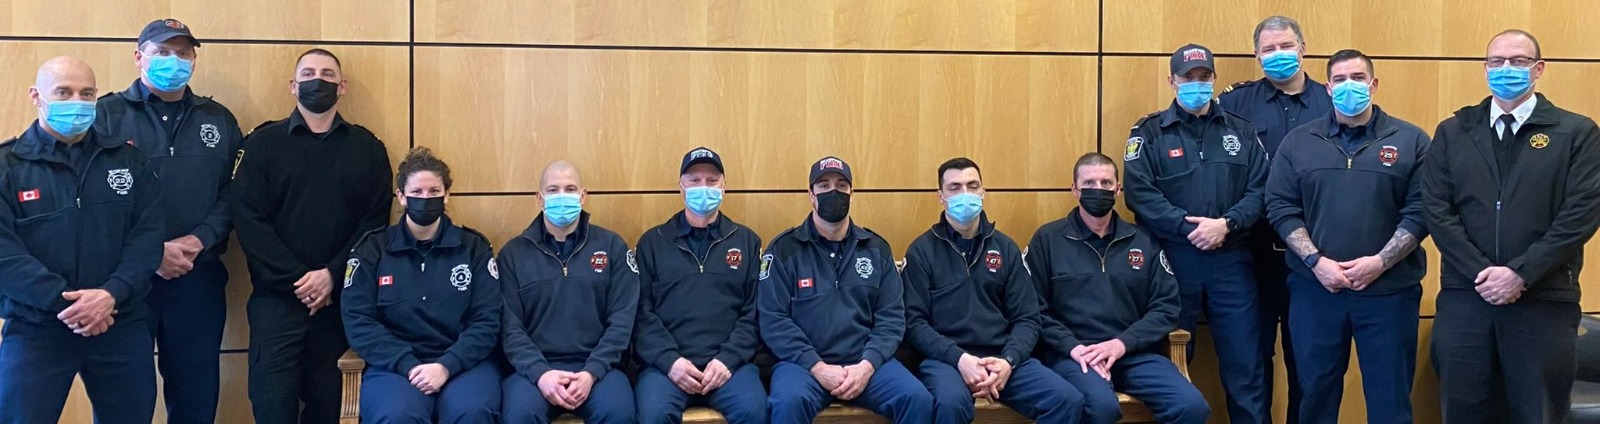 group of firefighters in masks posing for photo sitting down